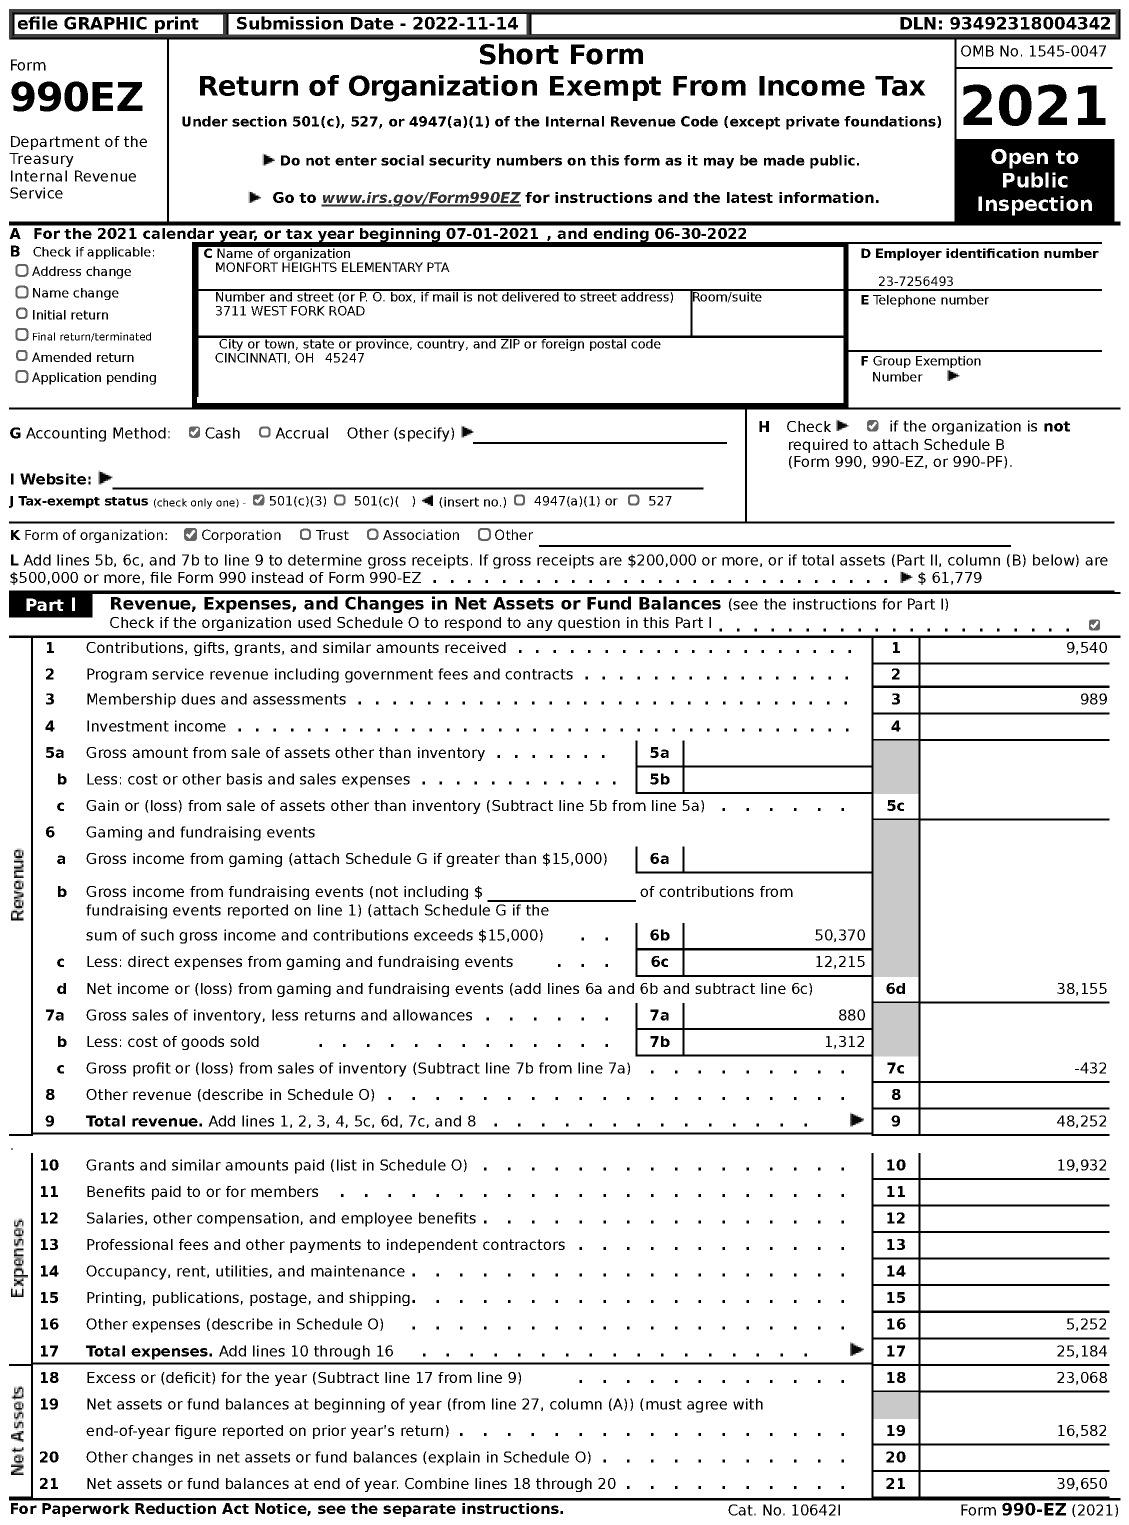 Image of first page of 2021 Form 990EZ for Monfort Heights Elementary PTA